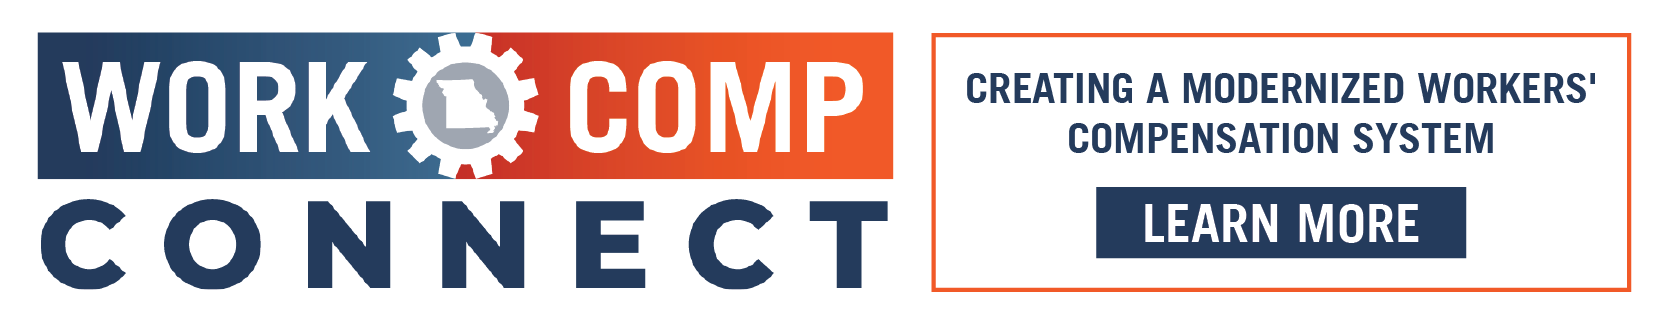 Work Comp Connect - Creating a Modernized Workers' Compensation System